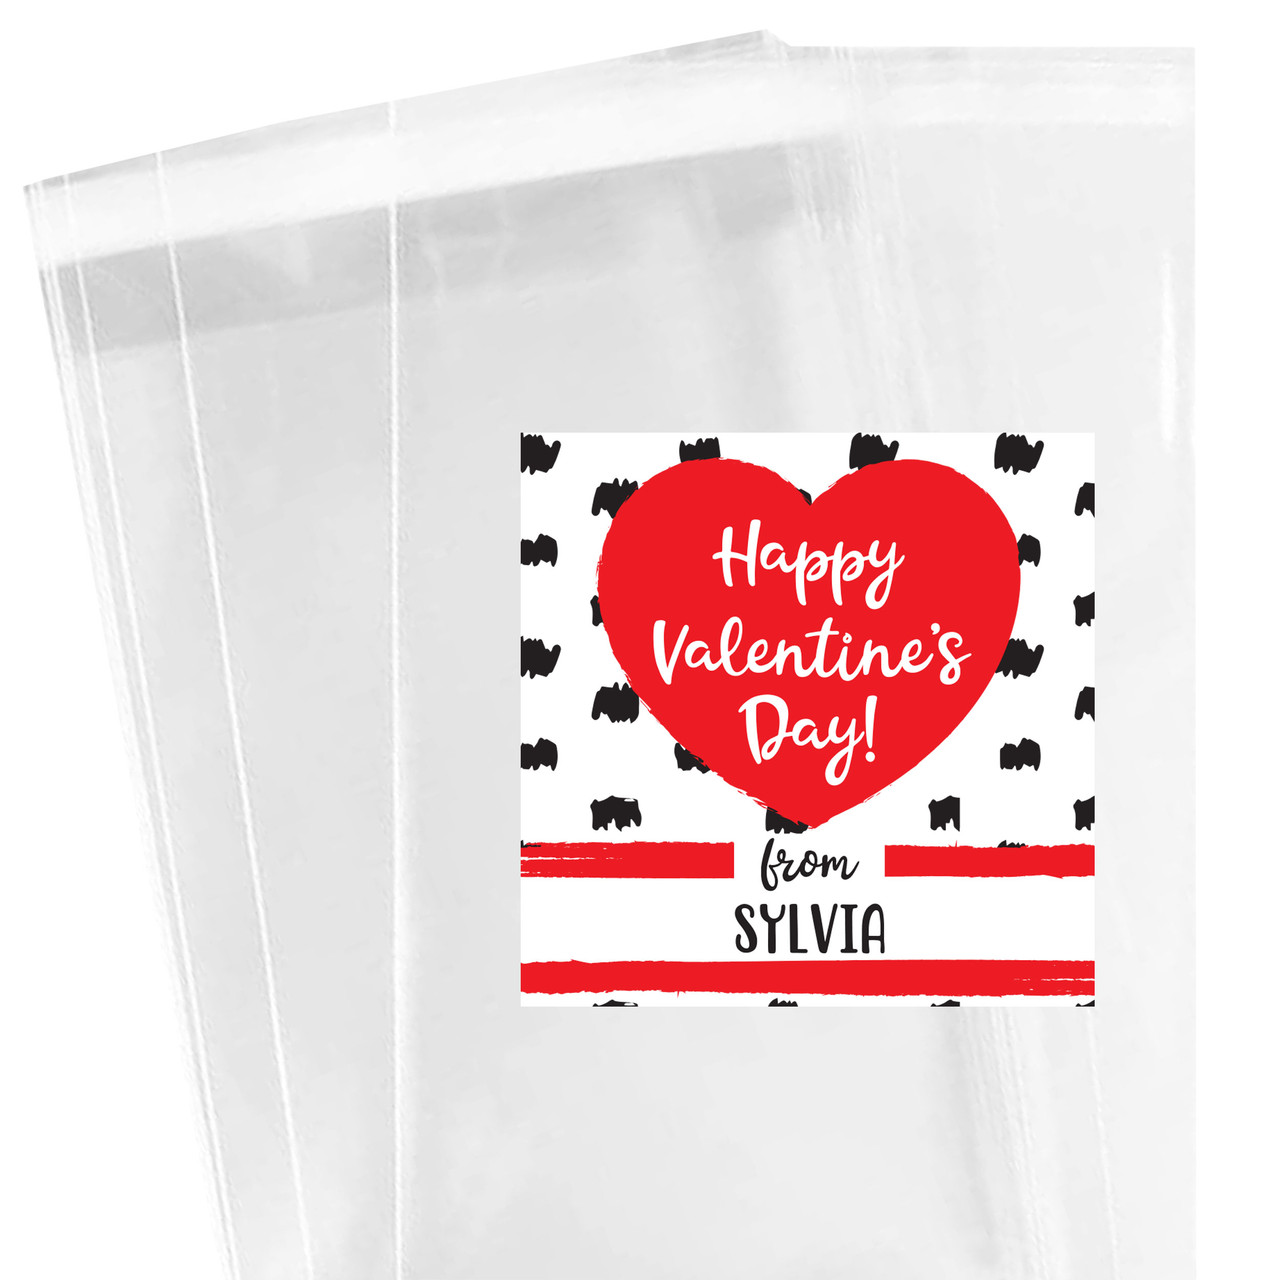 Mod Heart & Dots Personalized Valentine's Day Treat Bag Topper Kit